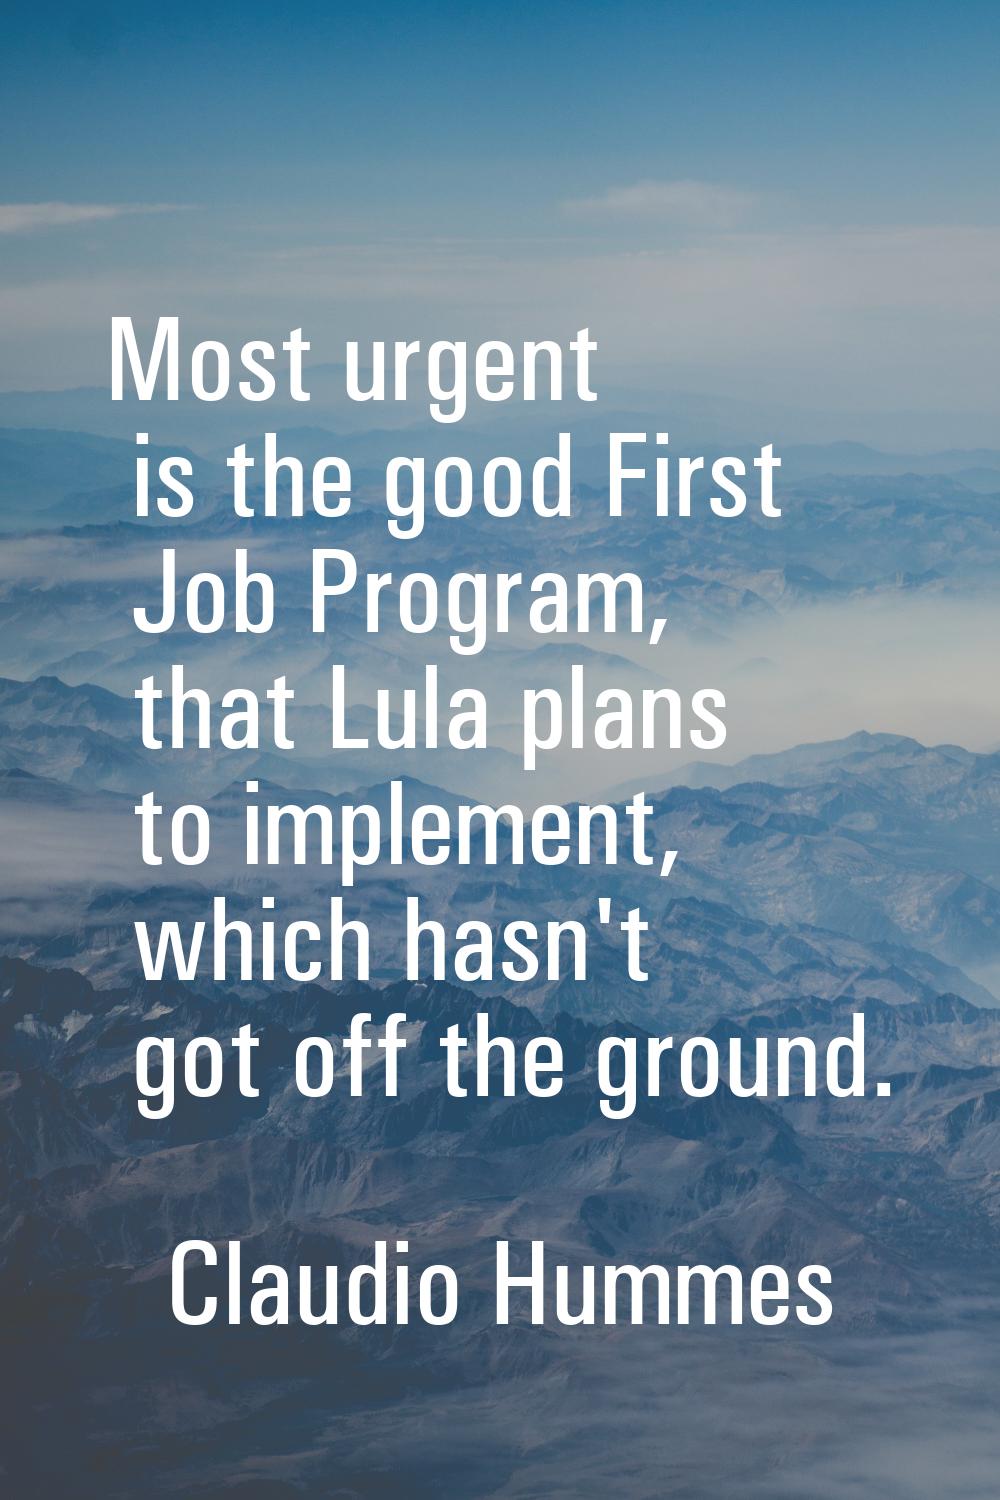 Most urgent is the good First Job Program, that Lula plans to implement, which hasn't got off the g